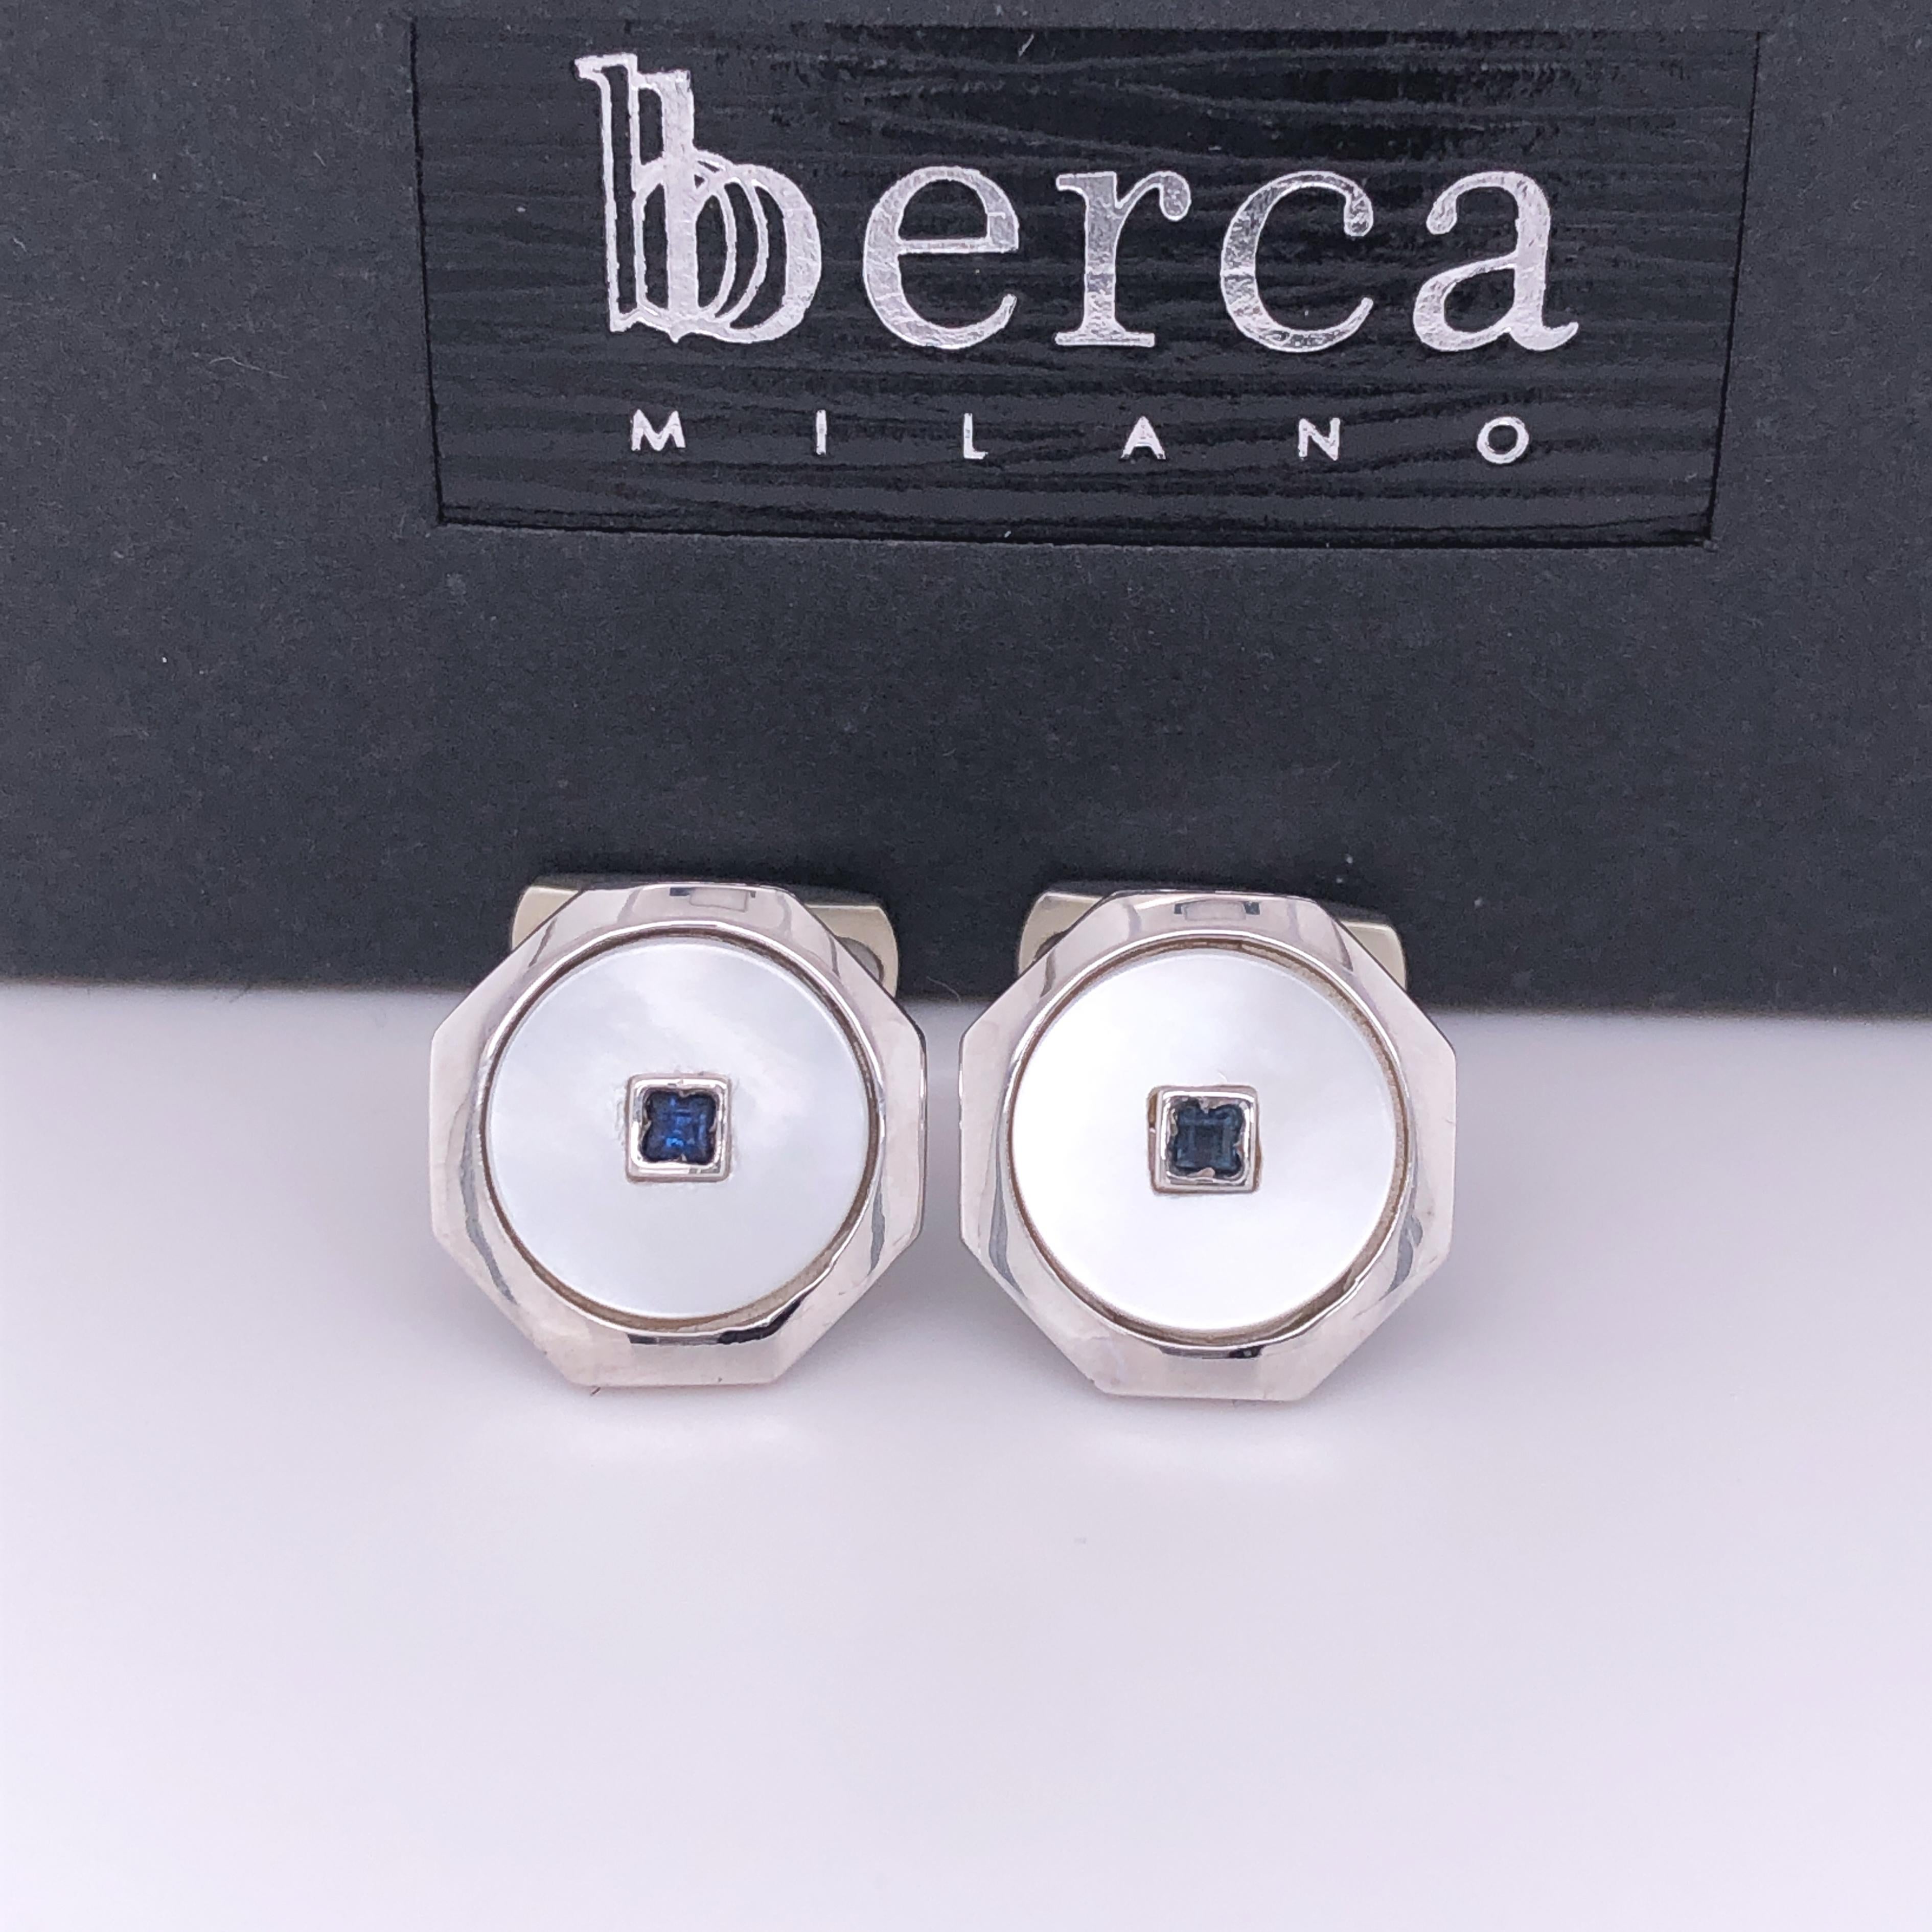 Absolutely Chic Yet Timeless 0.14 Carat Square Shaped Natural Blue Sapphire in a white round mother-of-pearl disk, white gold octagonal setting, t-bar back.

In our smart black box and pouch.